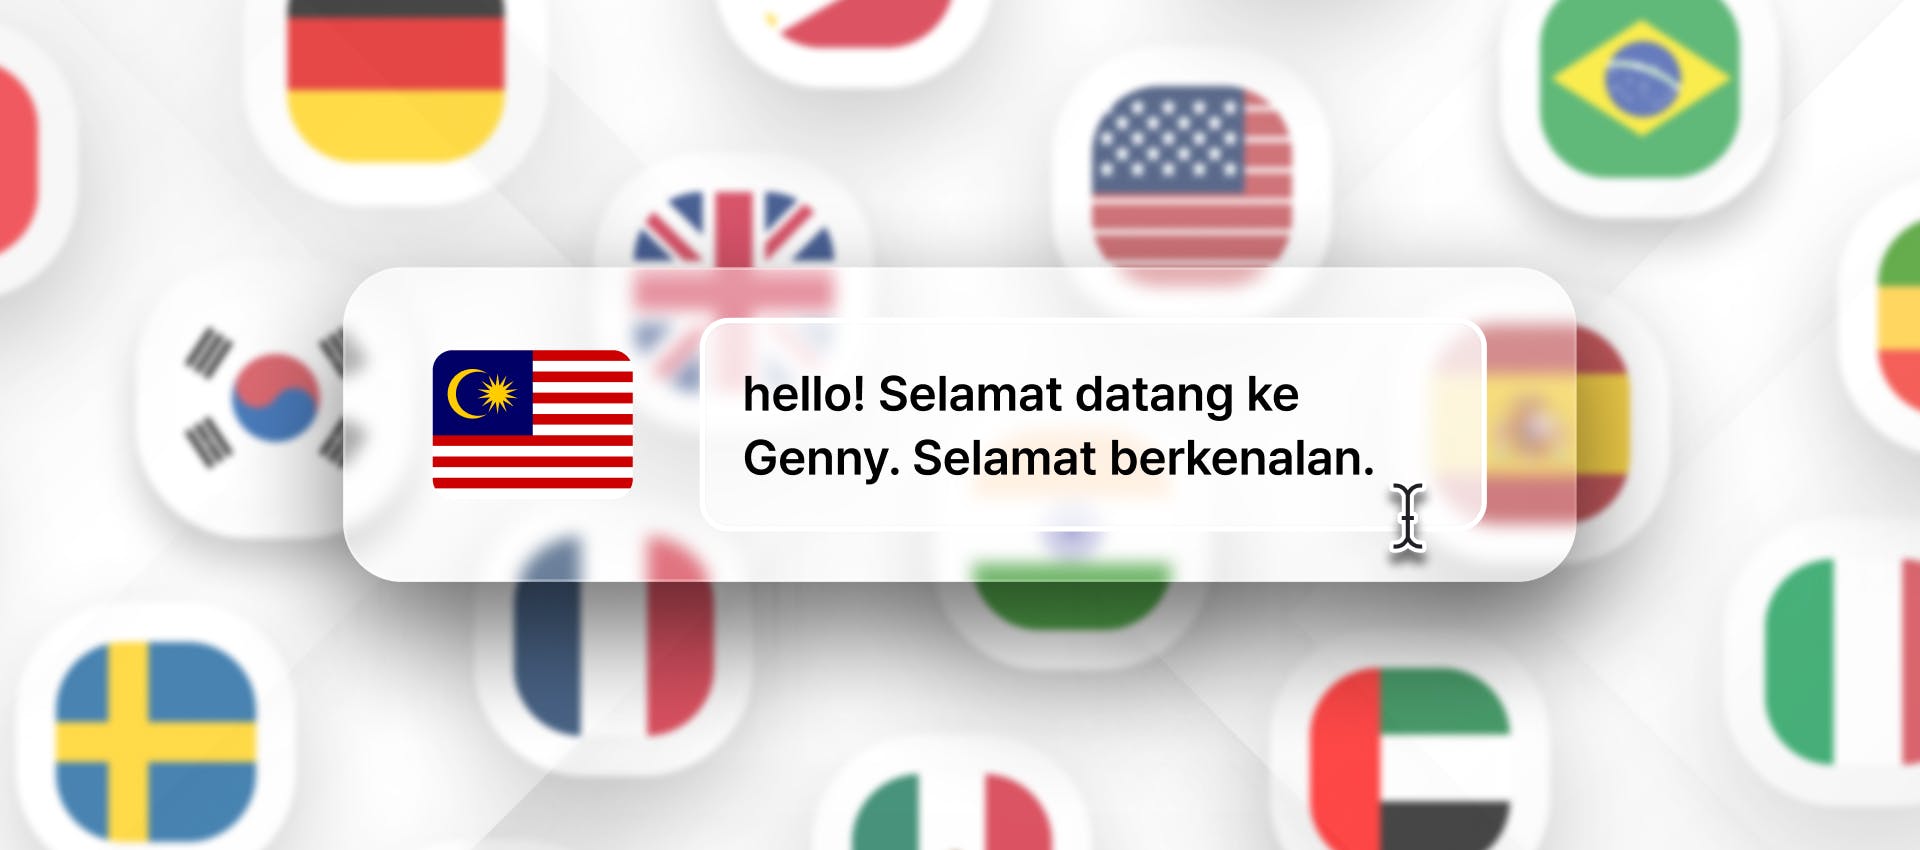 Malay phrase for Malay TTS generation with different flags in the background